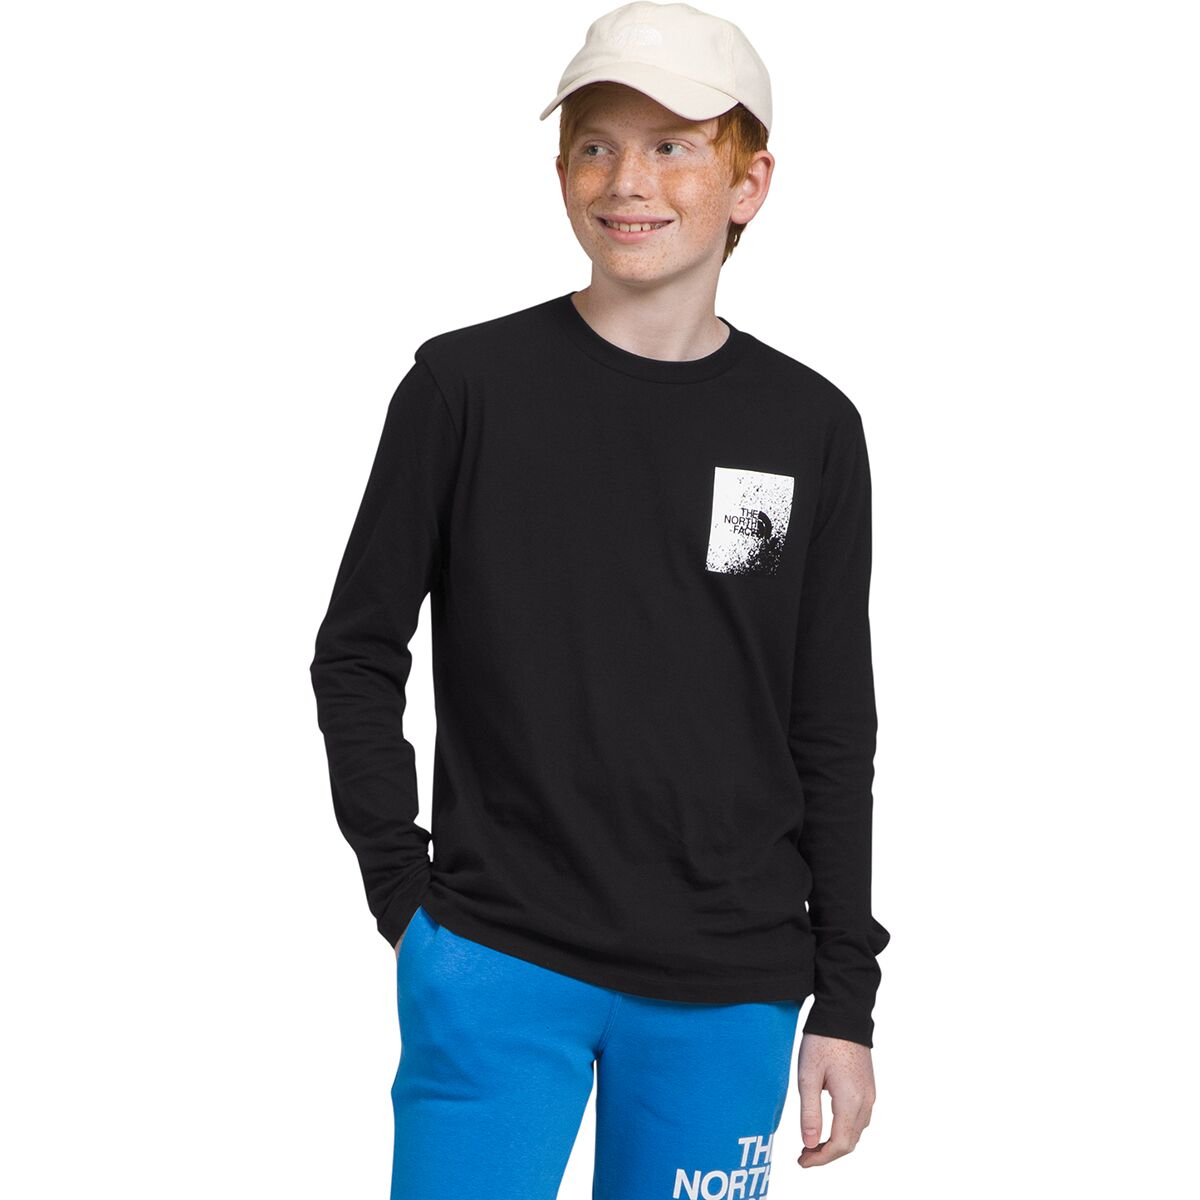 The North Face Graphic Long-Sleeve T-Shirt - Boys'